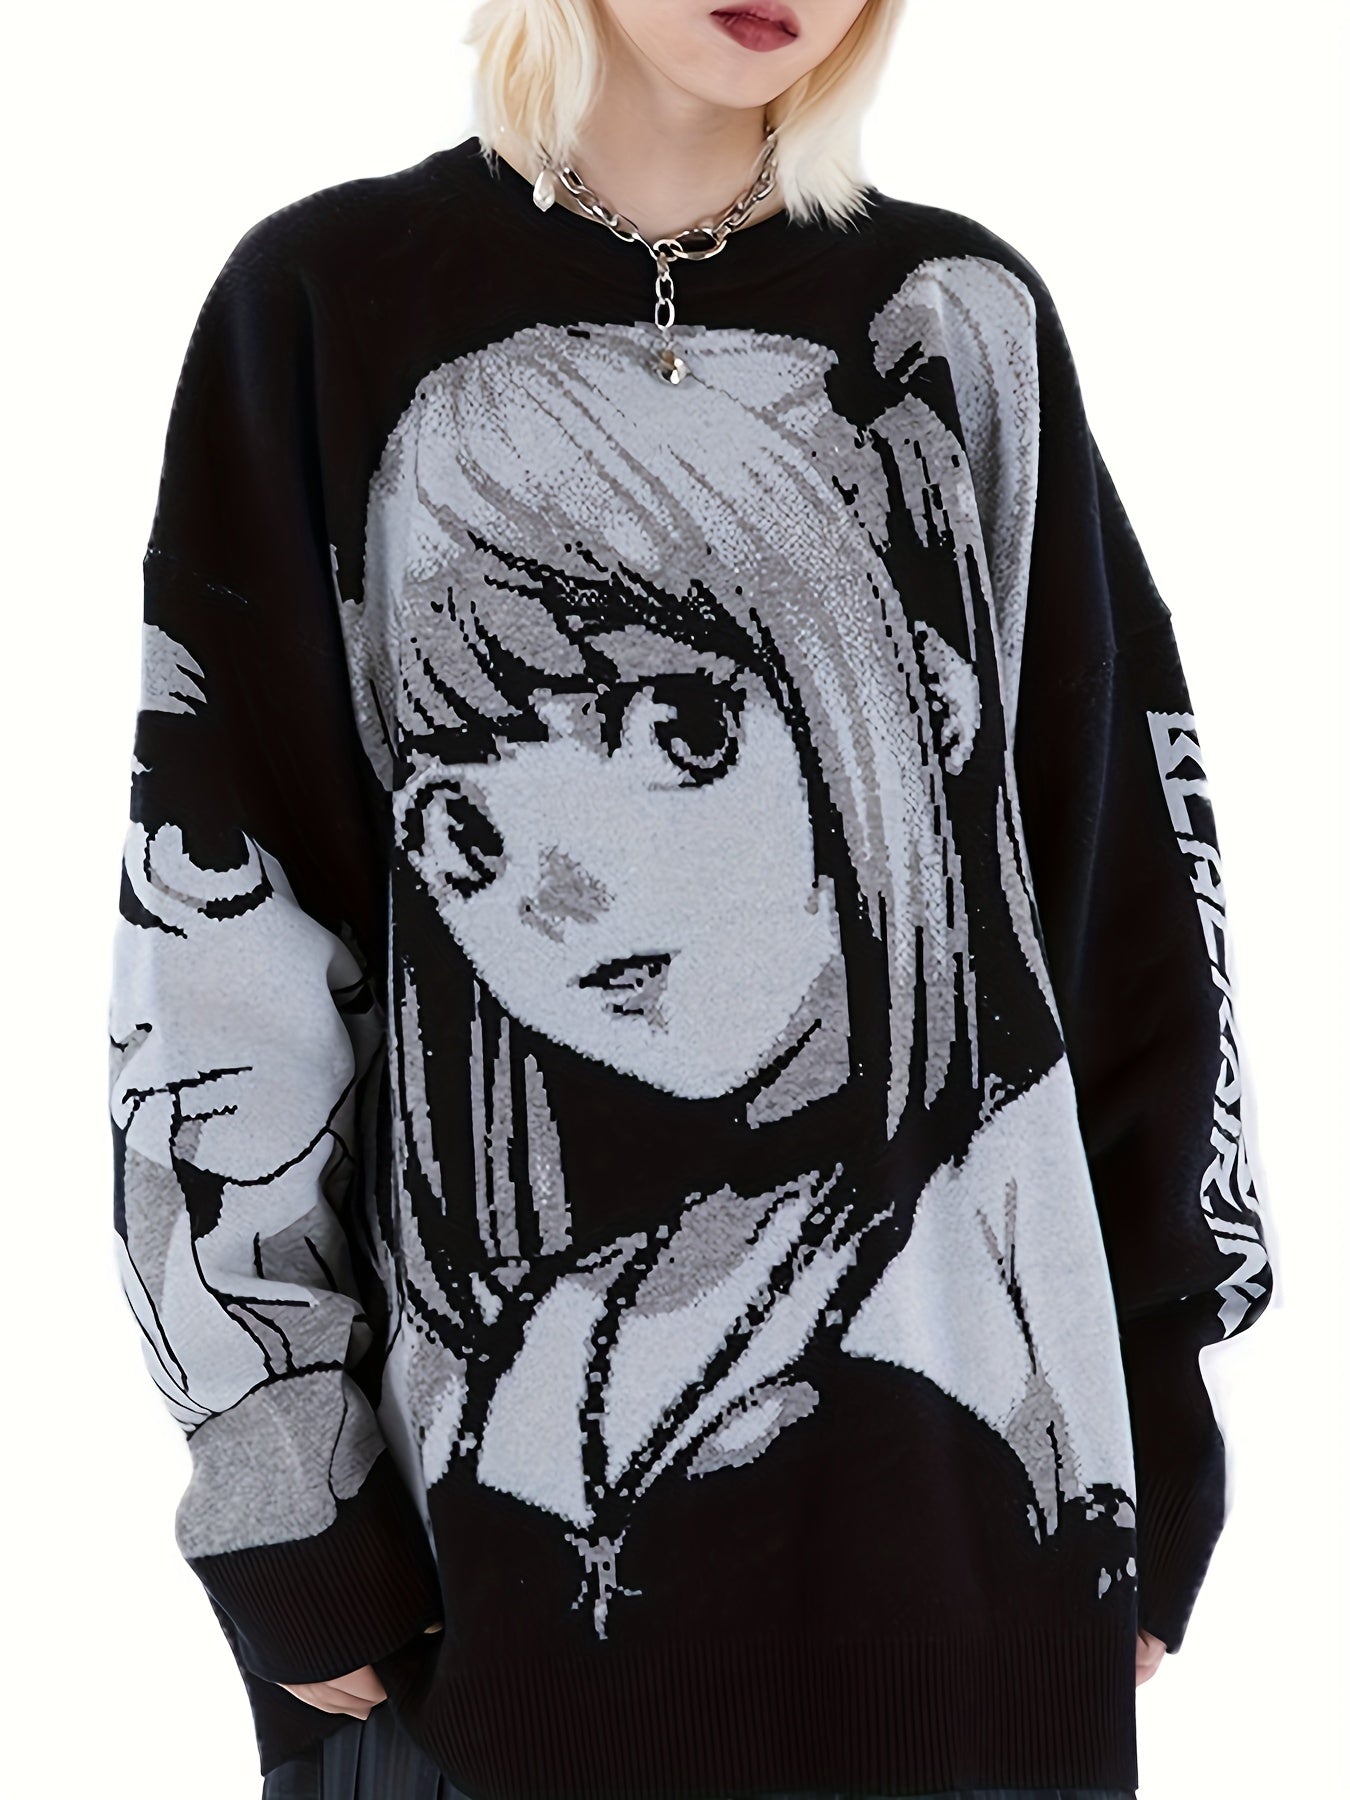 Anime Graphic & Letter Print Pullover Sweater, Cute Long Sleeve Crew Neck Sweater, Women's Clothing - Rexpect Nerd